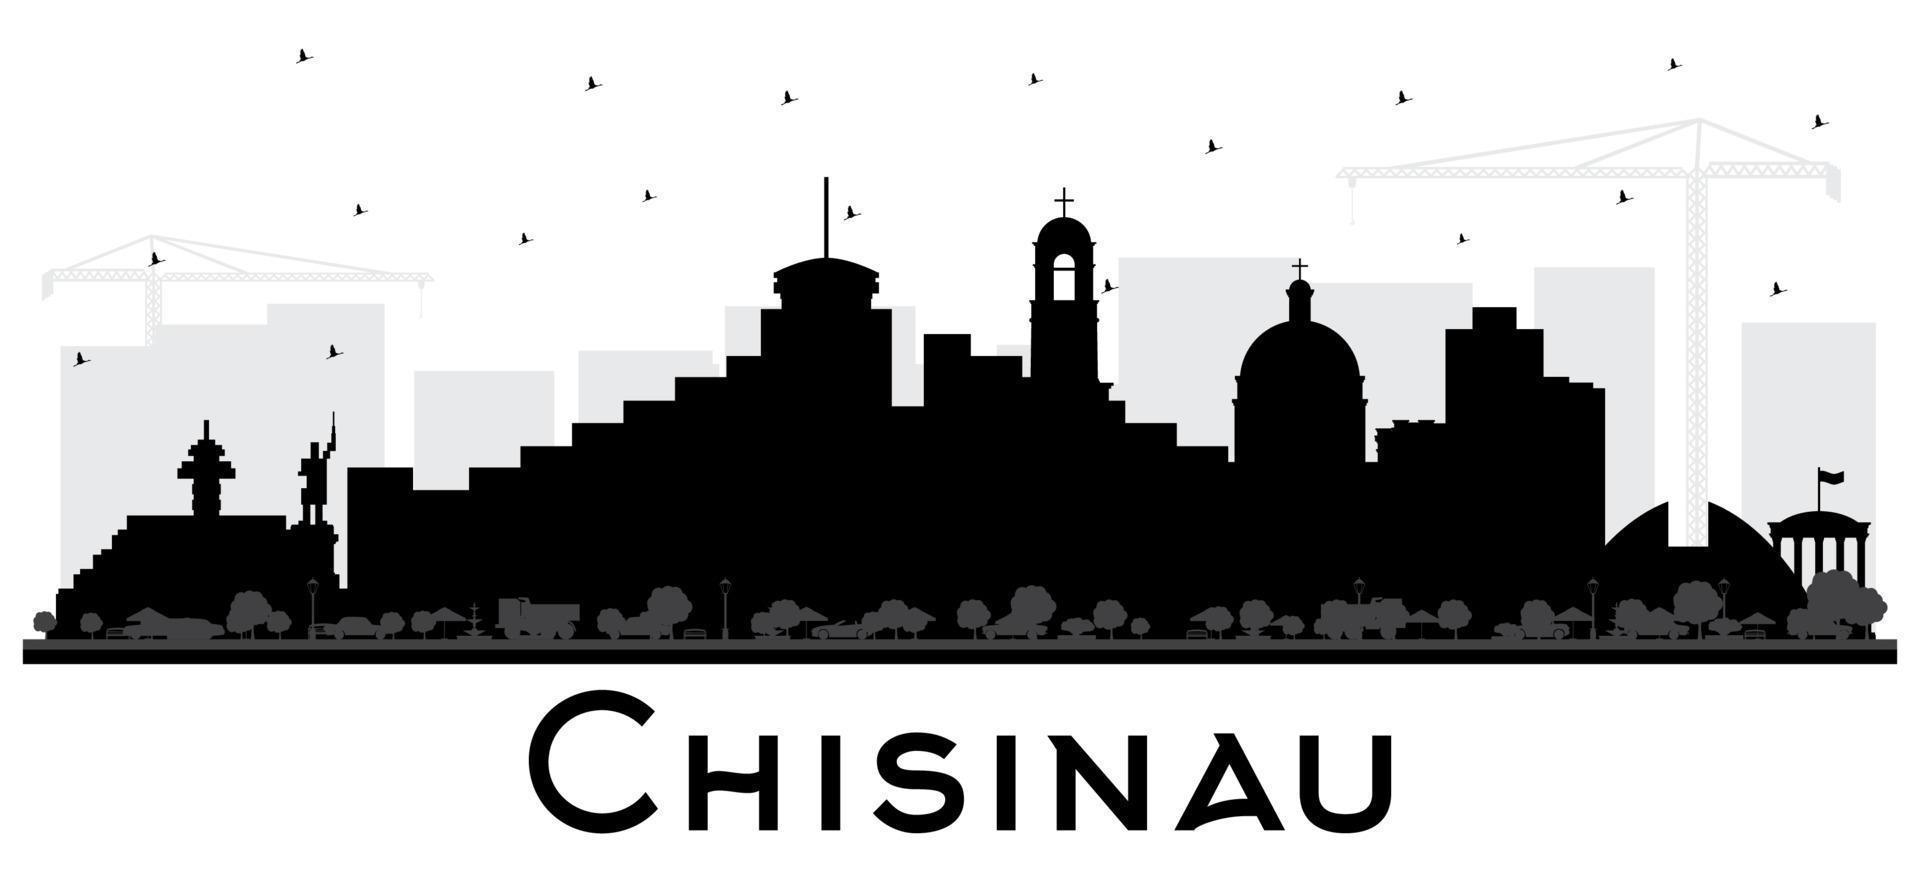 Chisinau Moldova City Skyline Silhouette with Black Buildings Isolated on White. vector